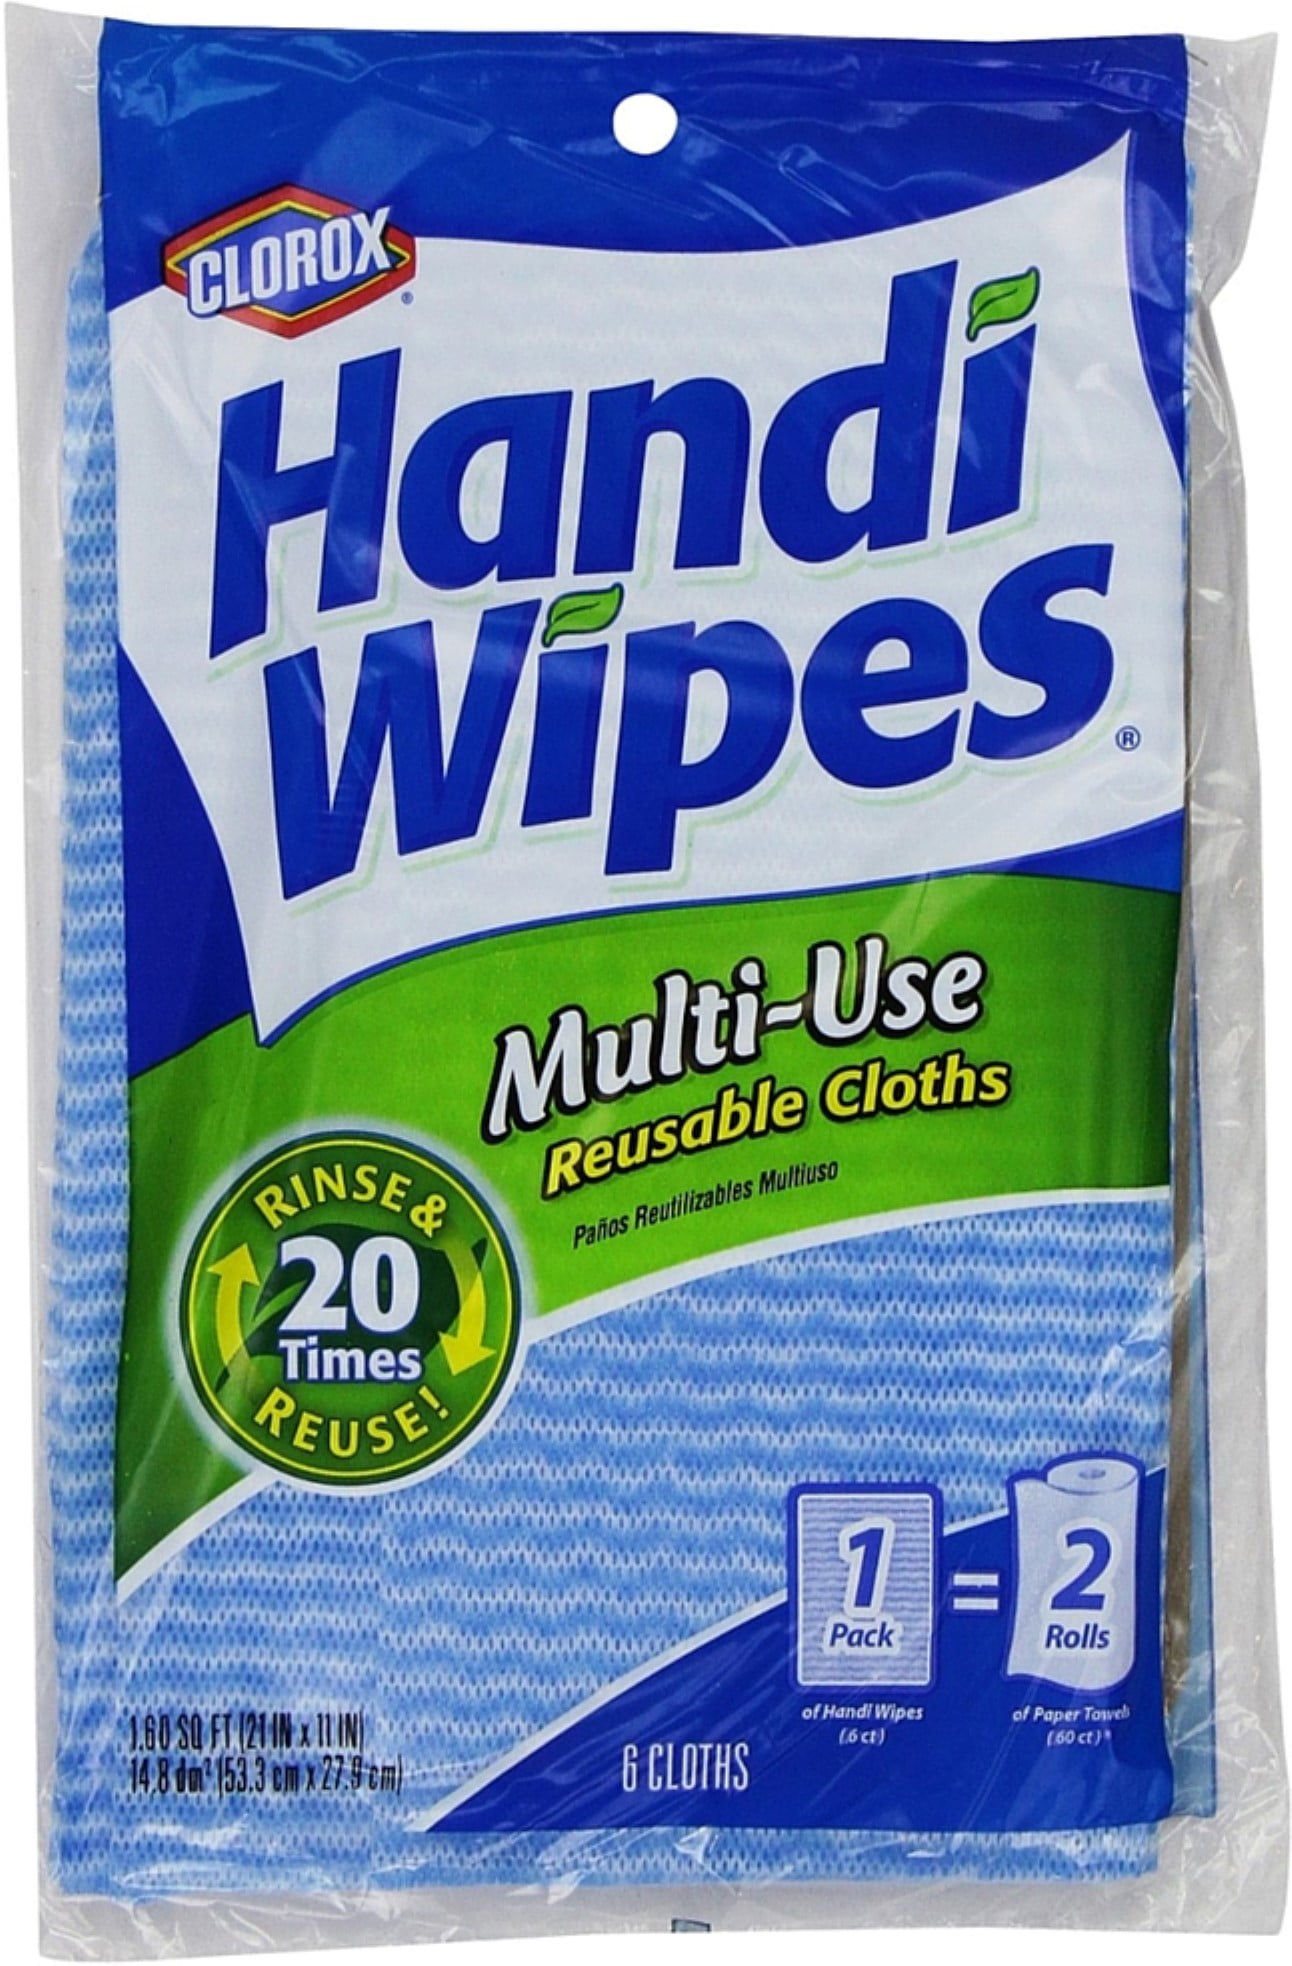 HEAVY DUTY HANDI CLEANING CLOTHS REUSABLE SUPER ABSORBENT MULTIPURPOSE 